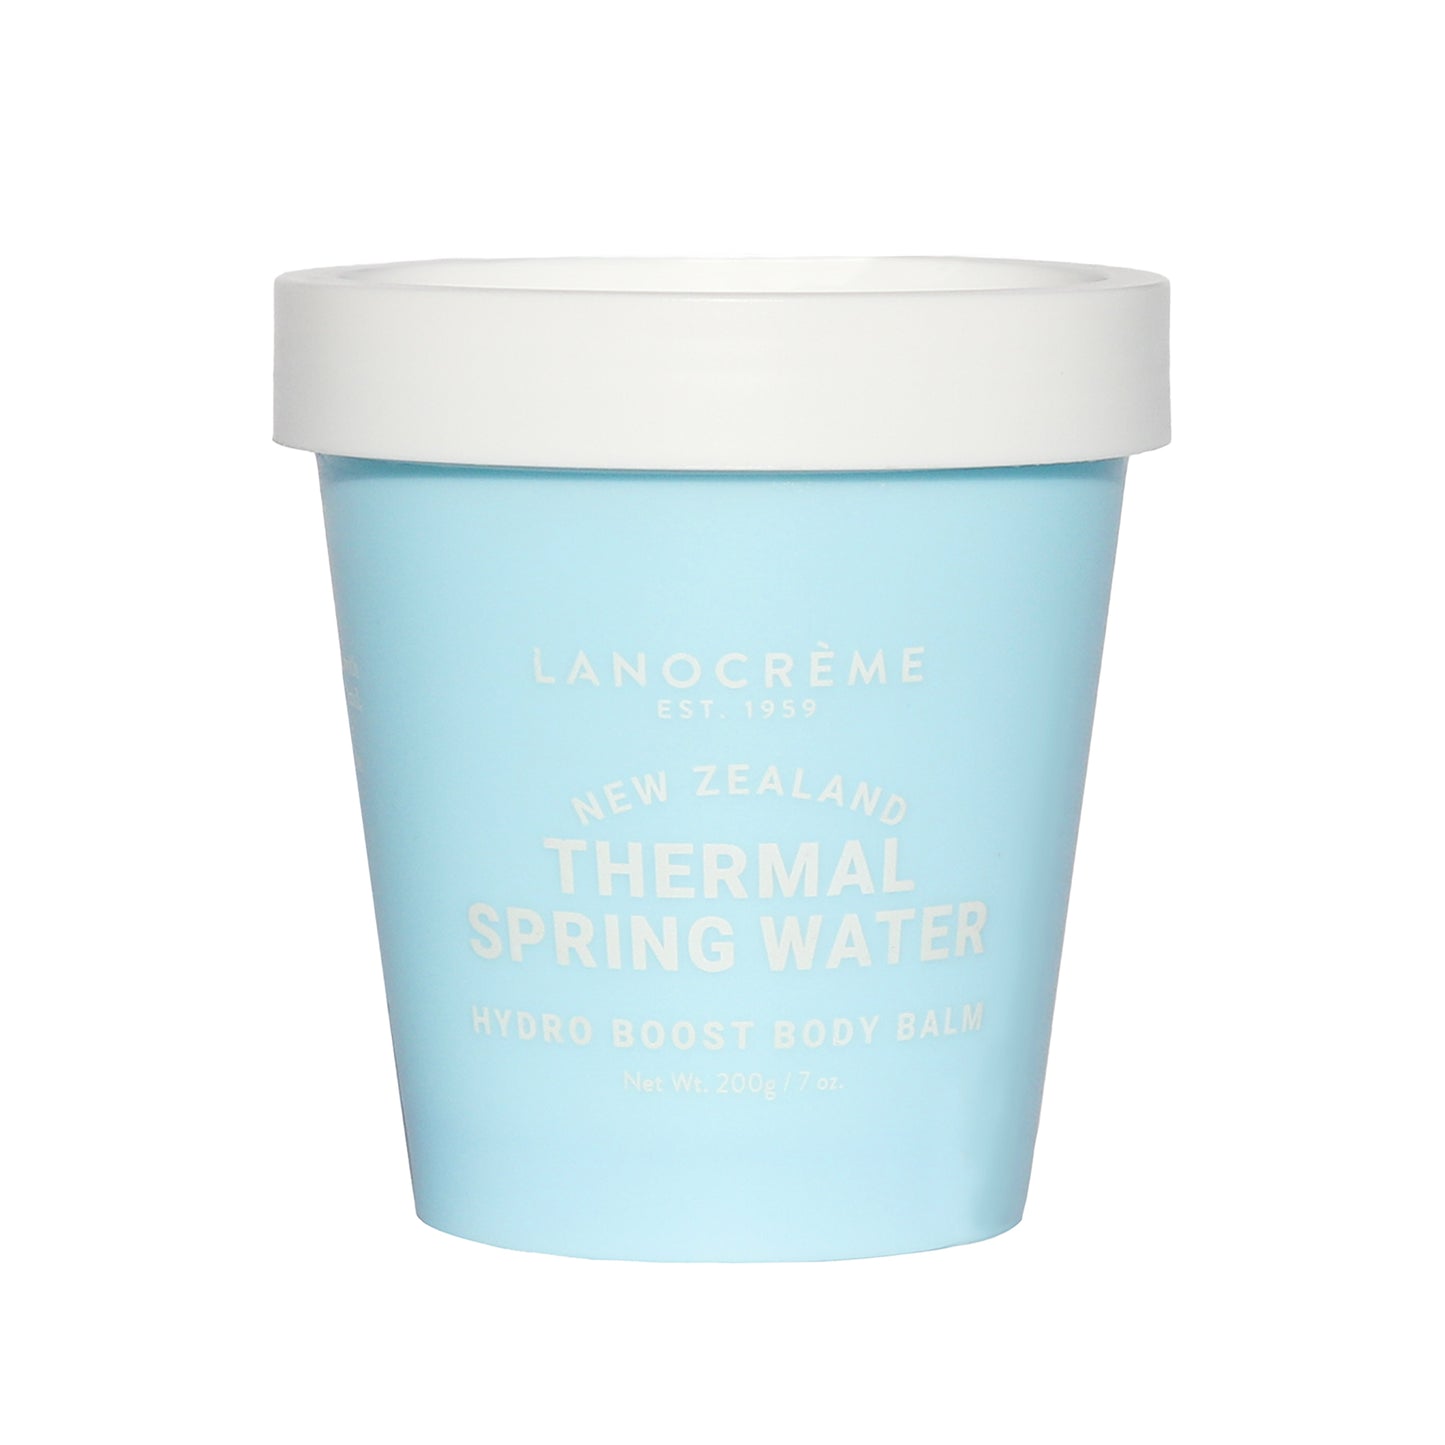 Thermal Spring Water Hydro Boost Body Balm